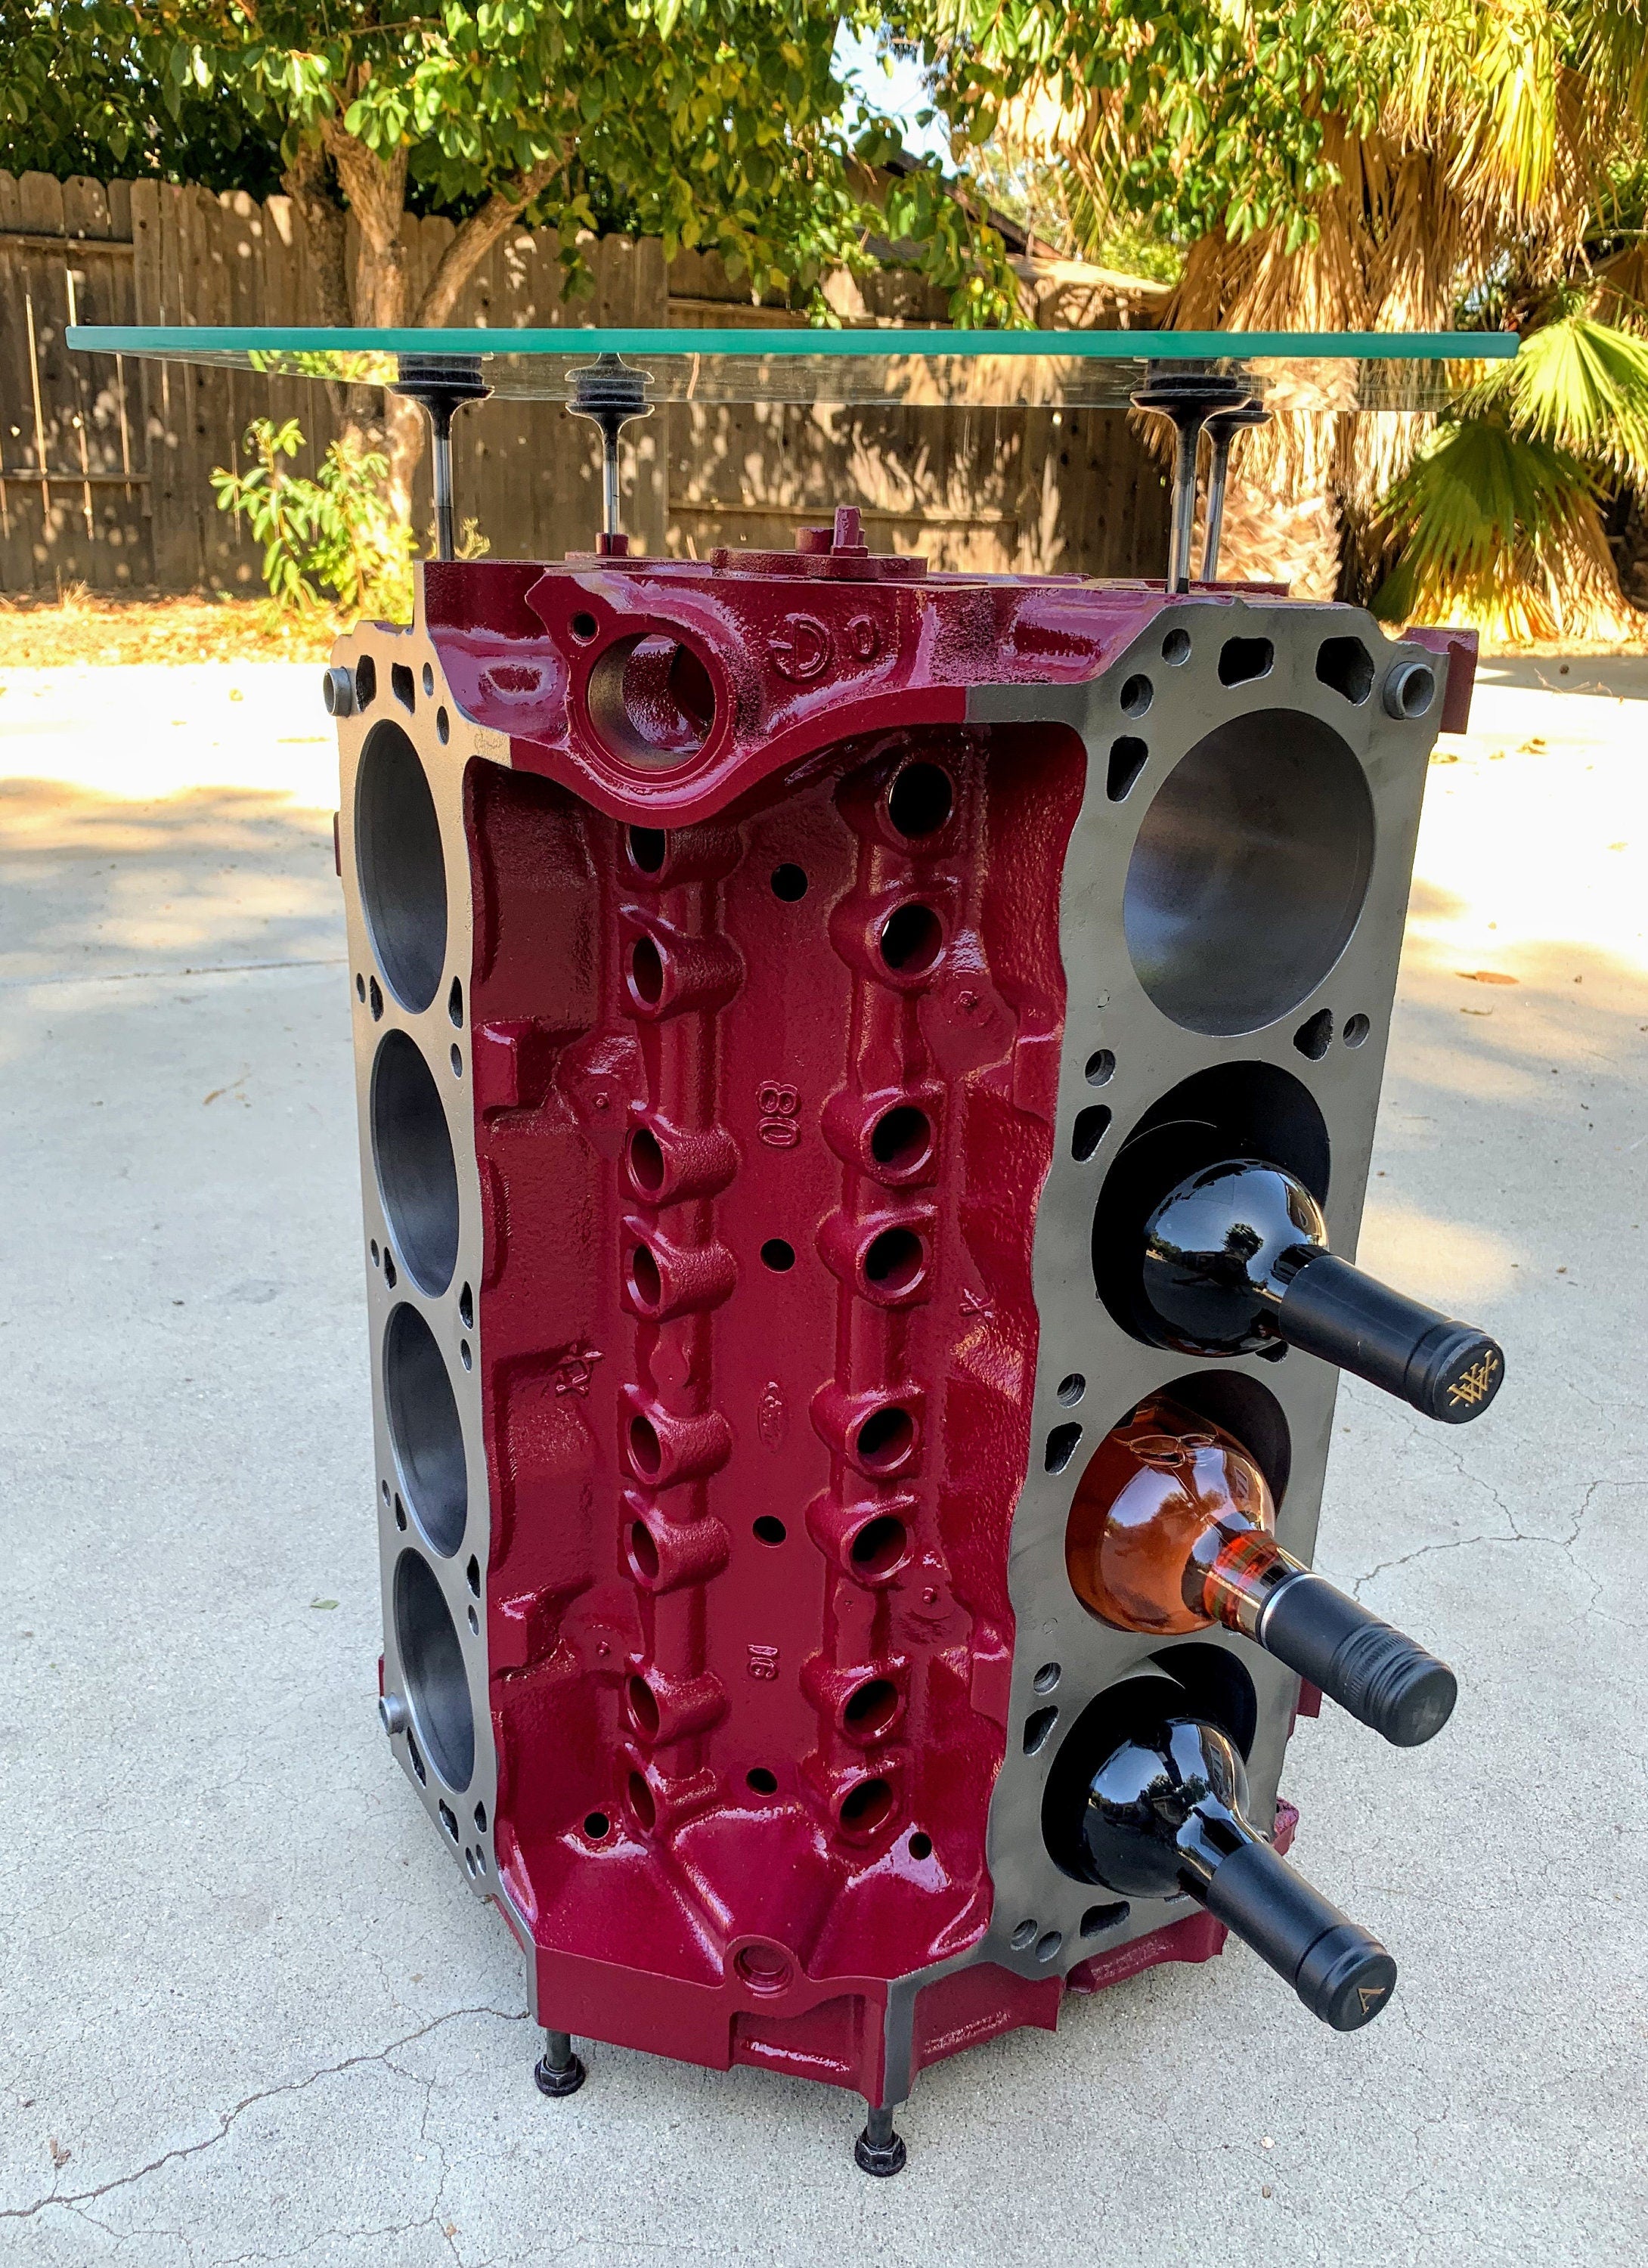 Engine block wine rack finished in red, with a square glass top and wine bottles stored in its side.